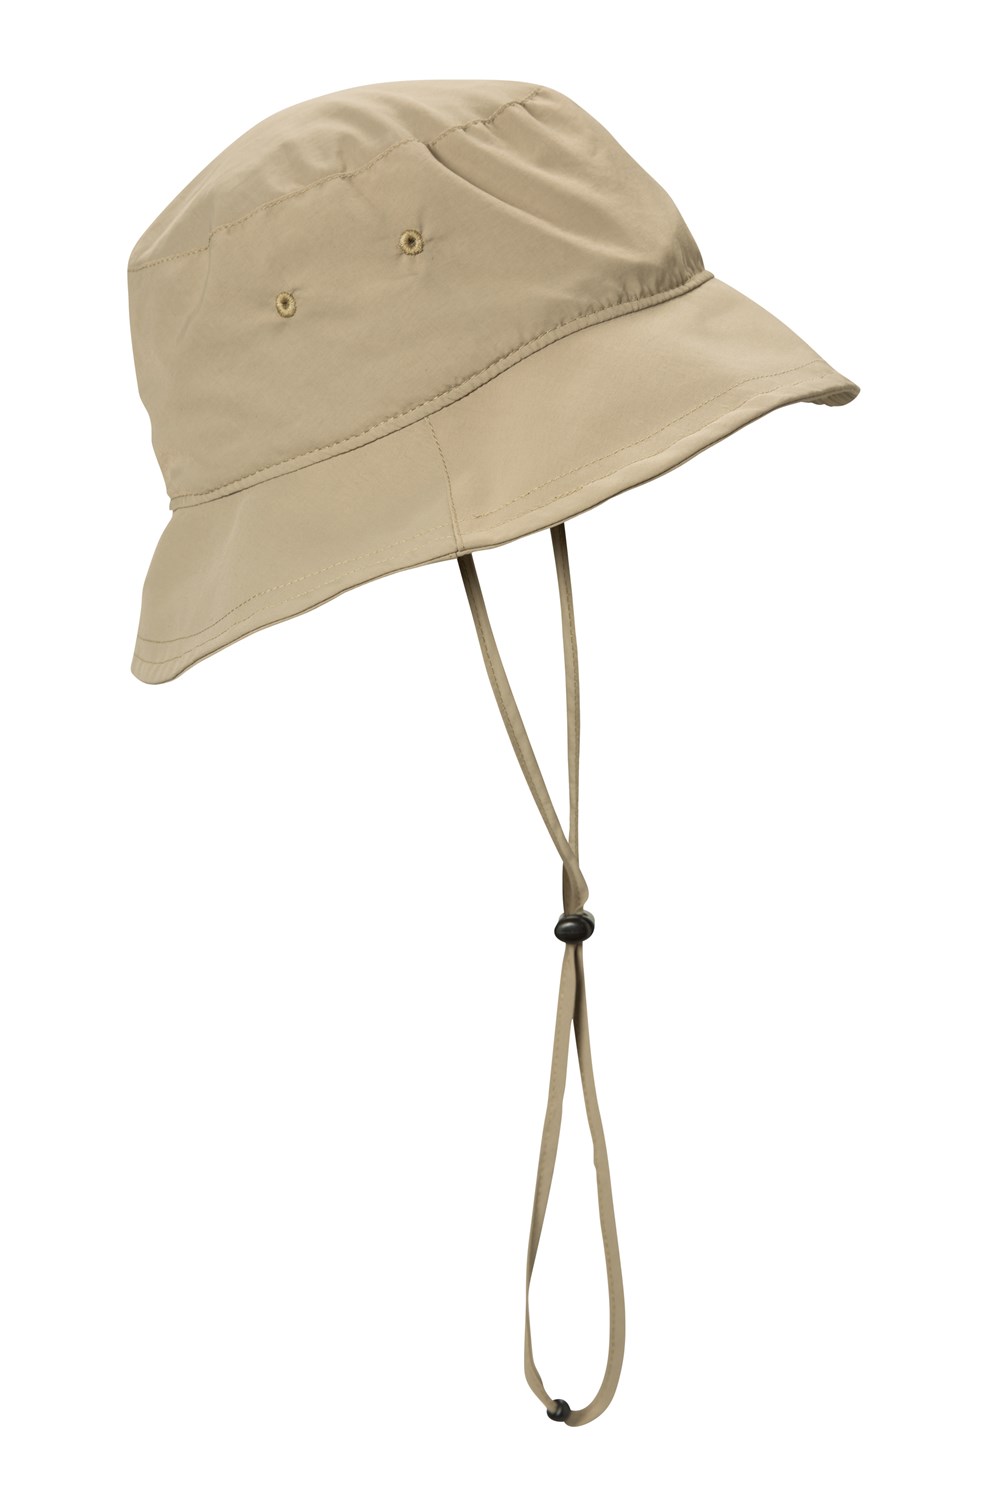 MOUNTAIN WAREHOUSE MENS IsoDry Bucket Hat High Wicking Quick Dry Summer ...